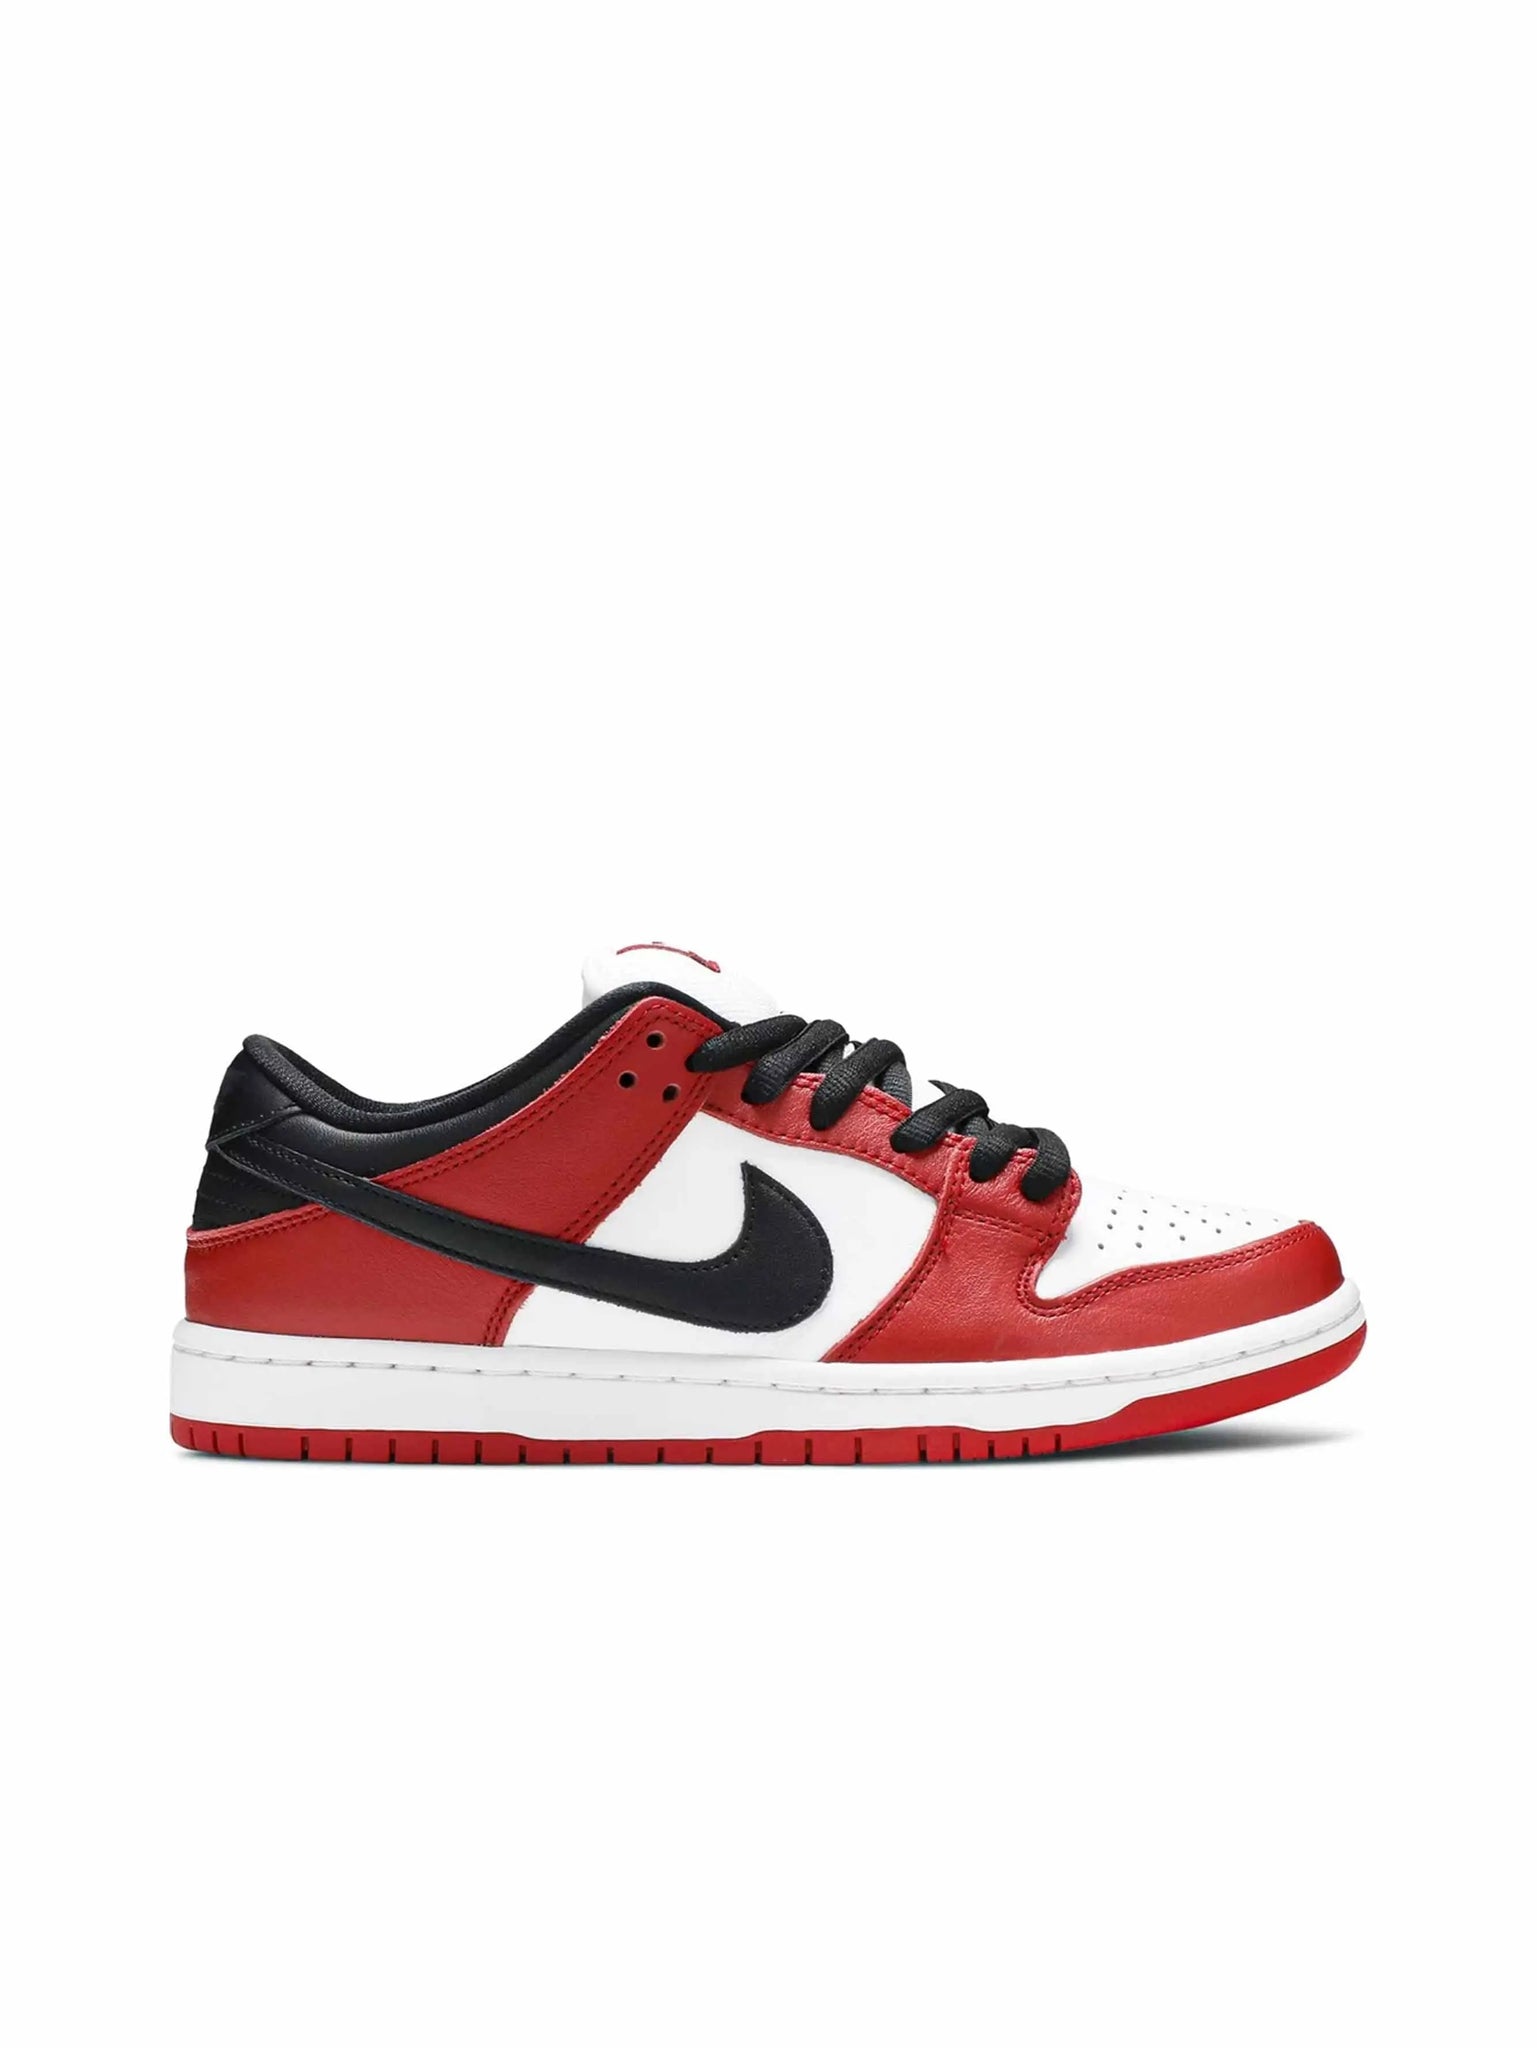 Nike SB Dunk Low J-Pack Chicago in Auckland, New Zealand - Shop name